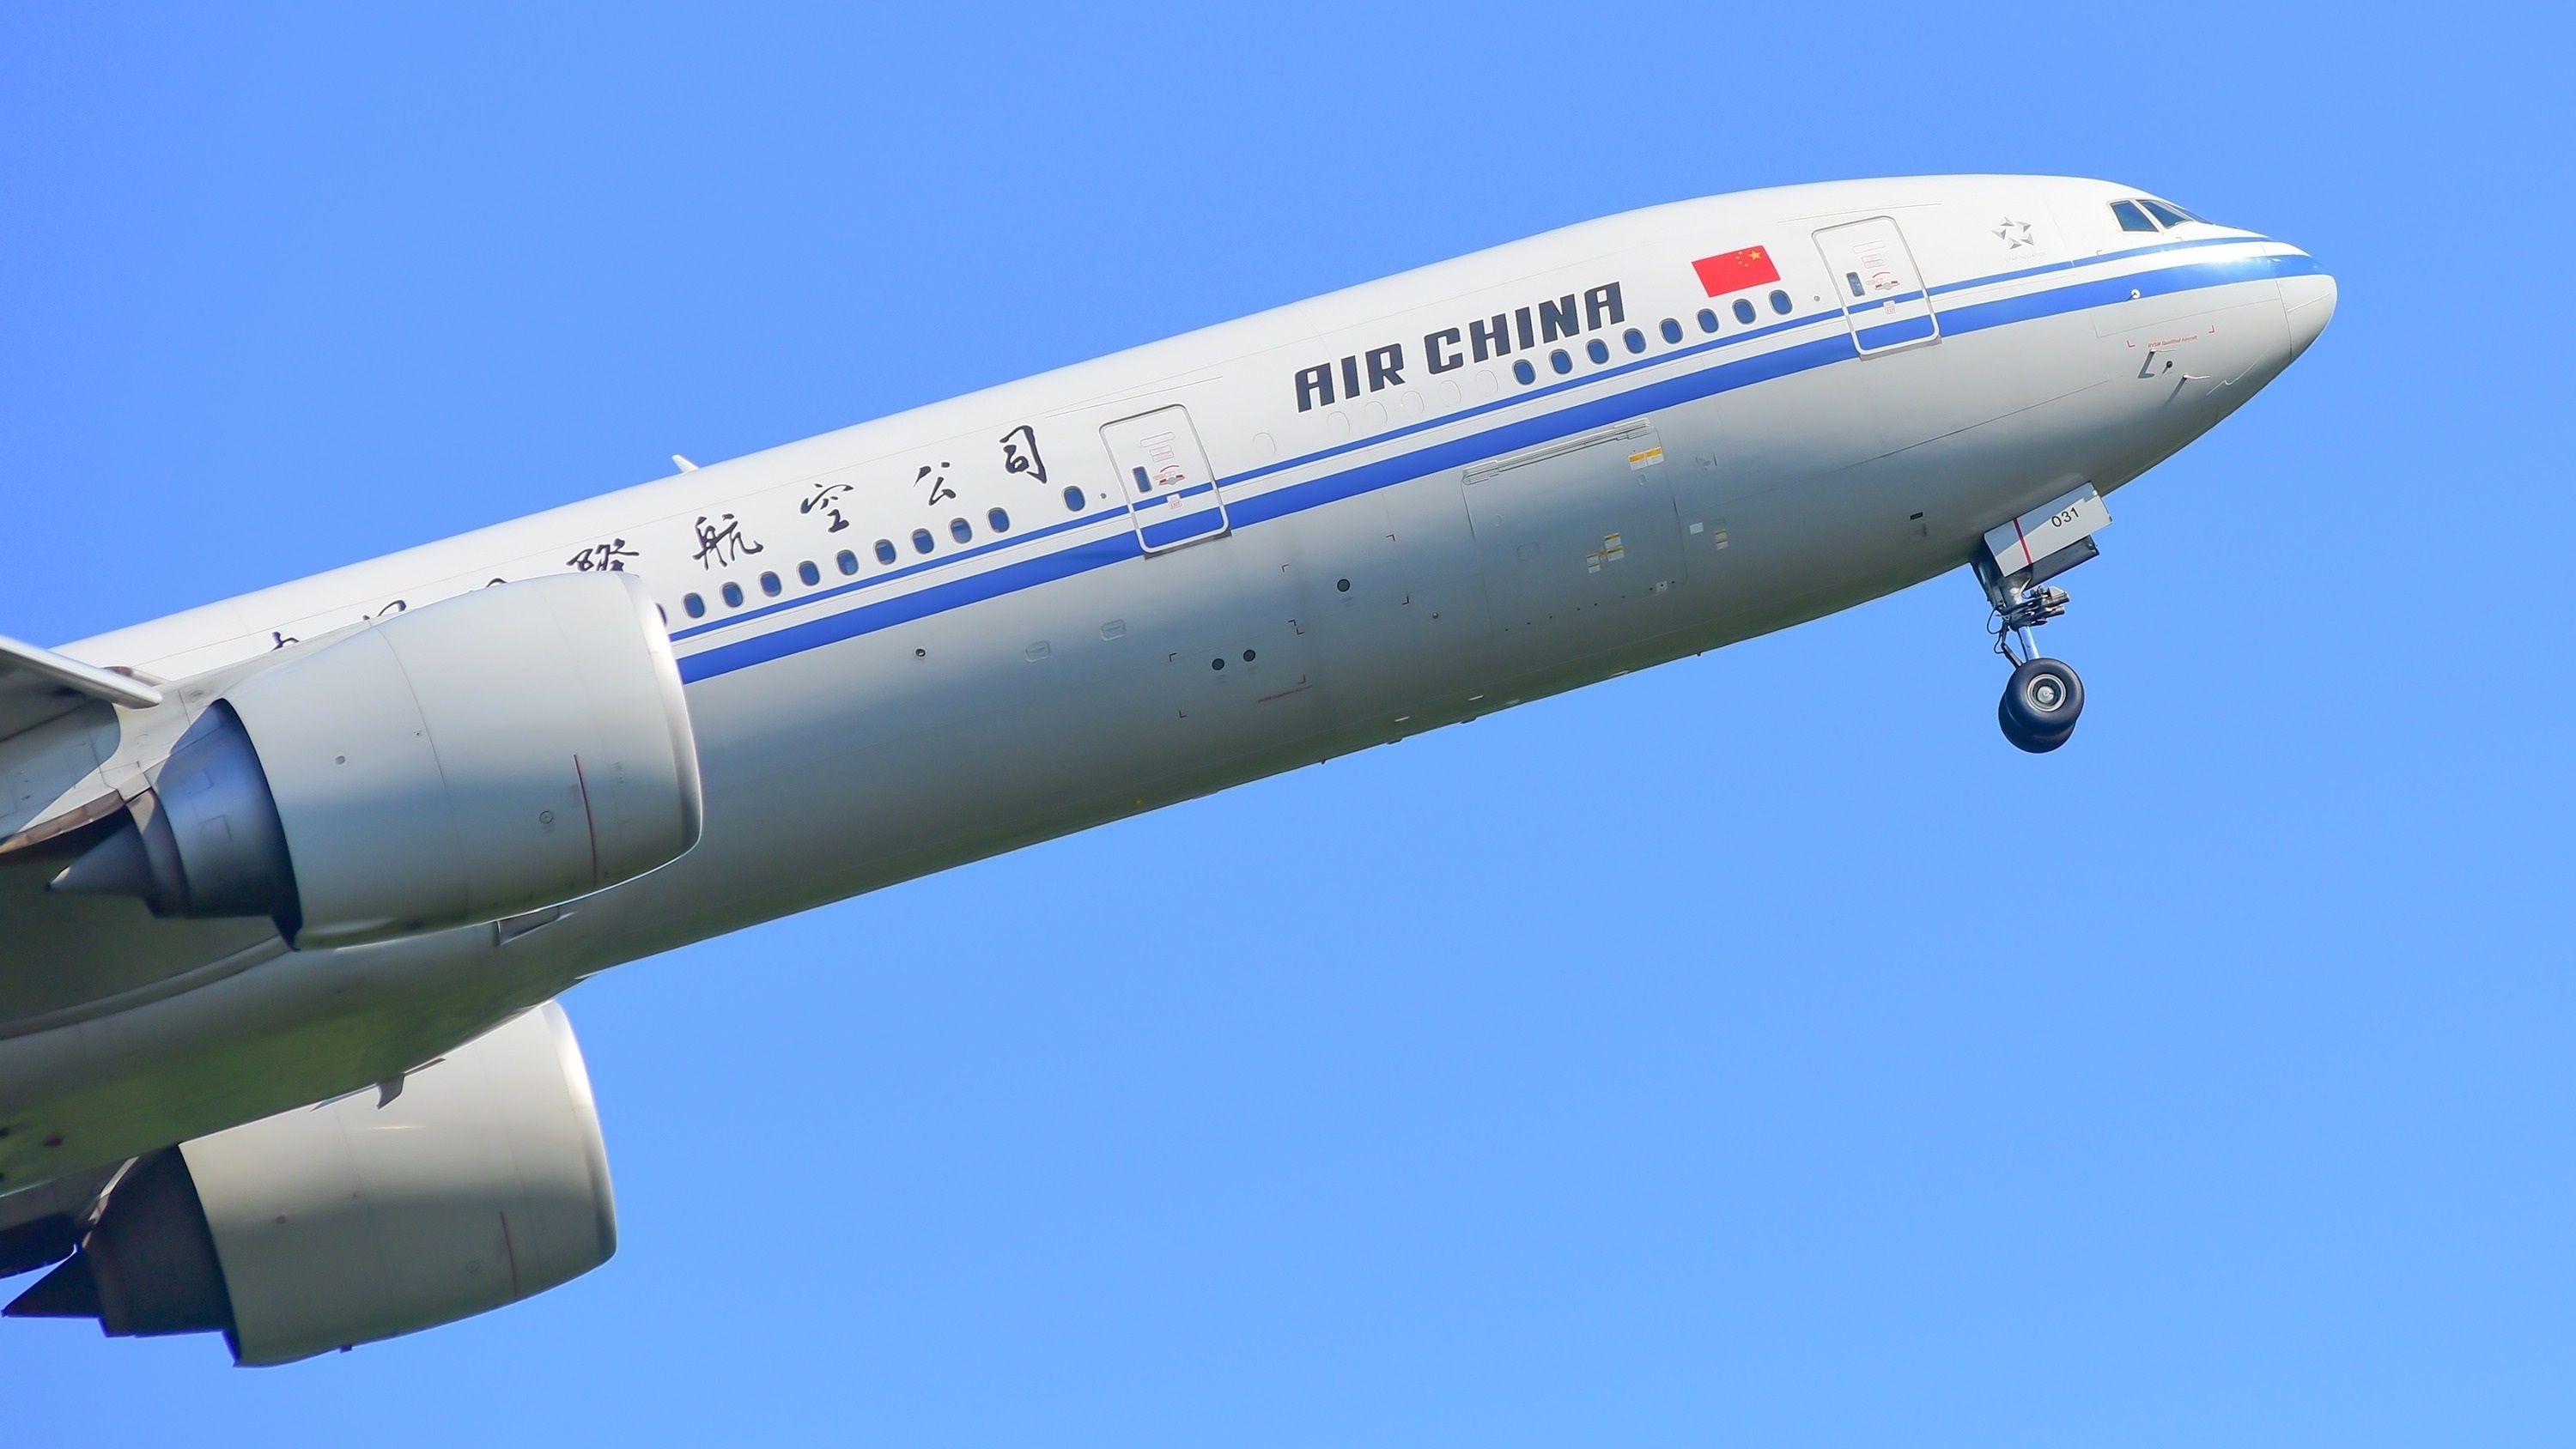 Air China flights function on the East Coast of america through Los Angeles